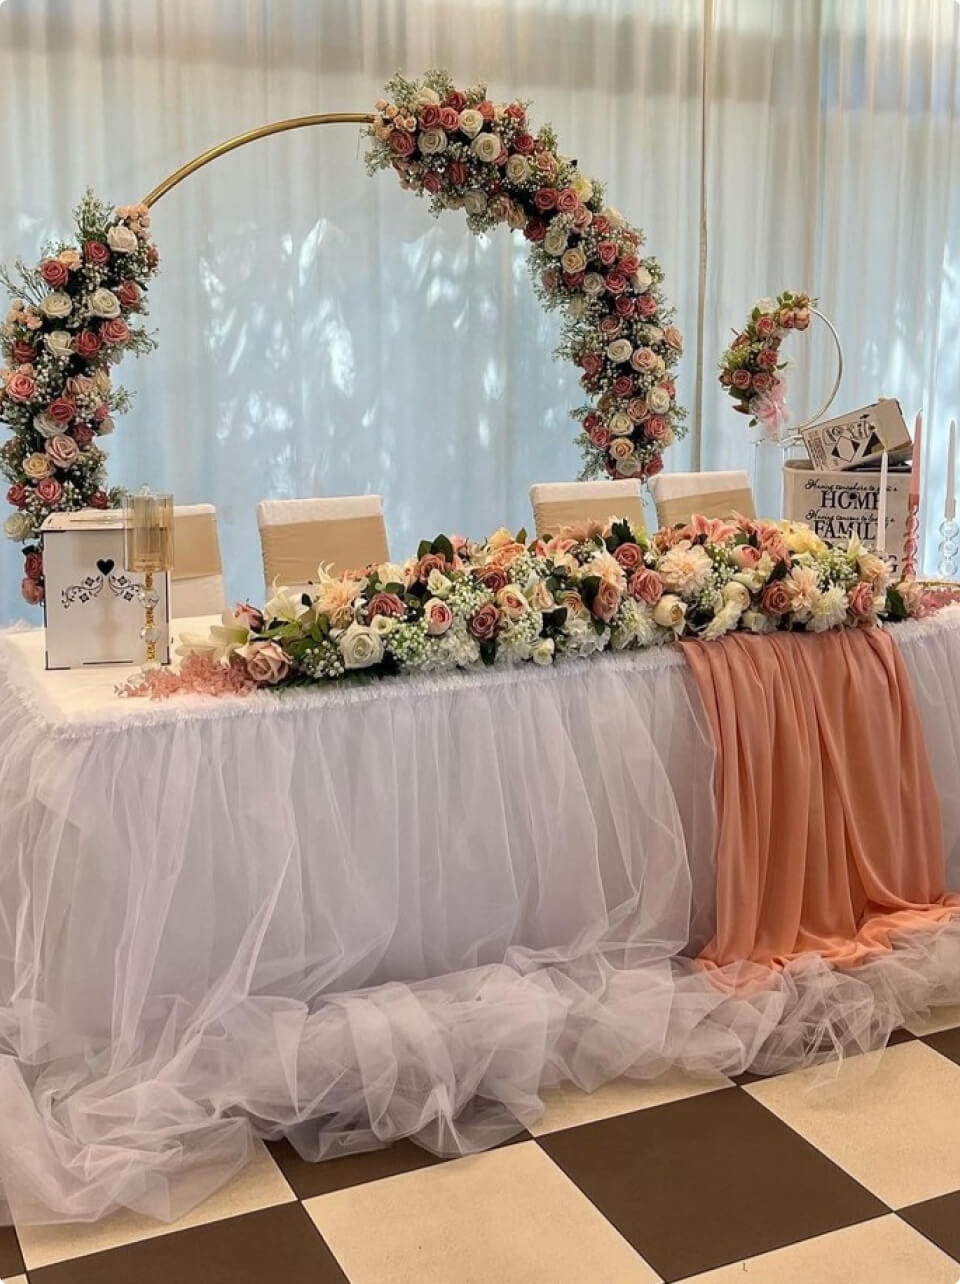 decorations-and-flowers-weddings-table-az-trans